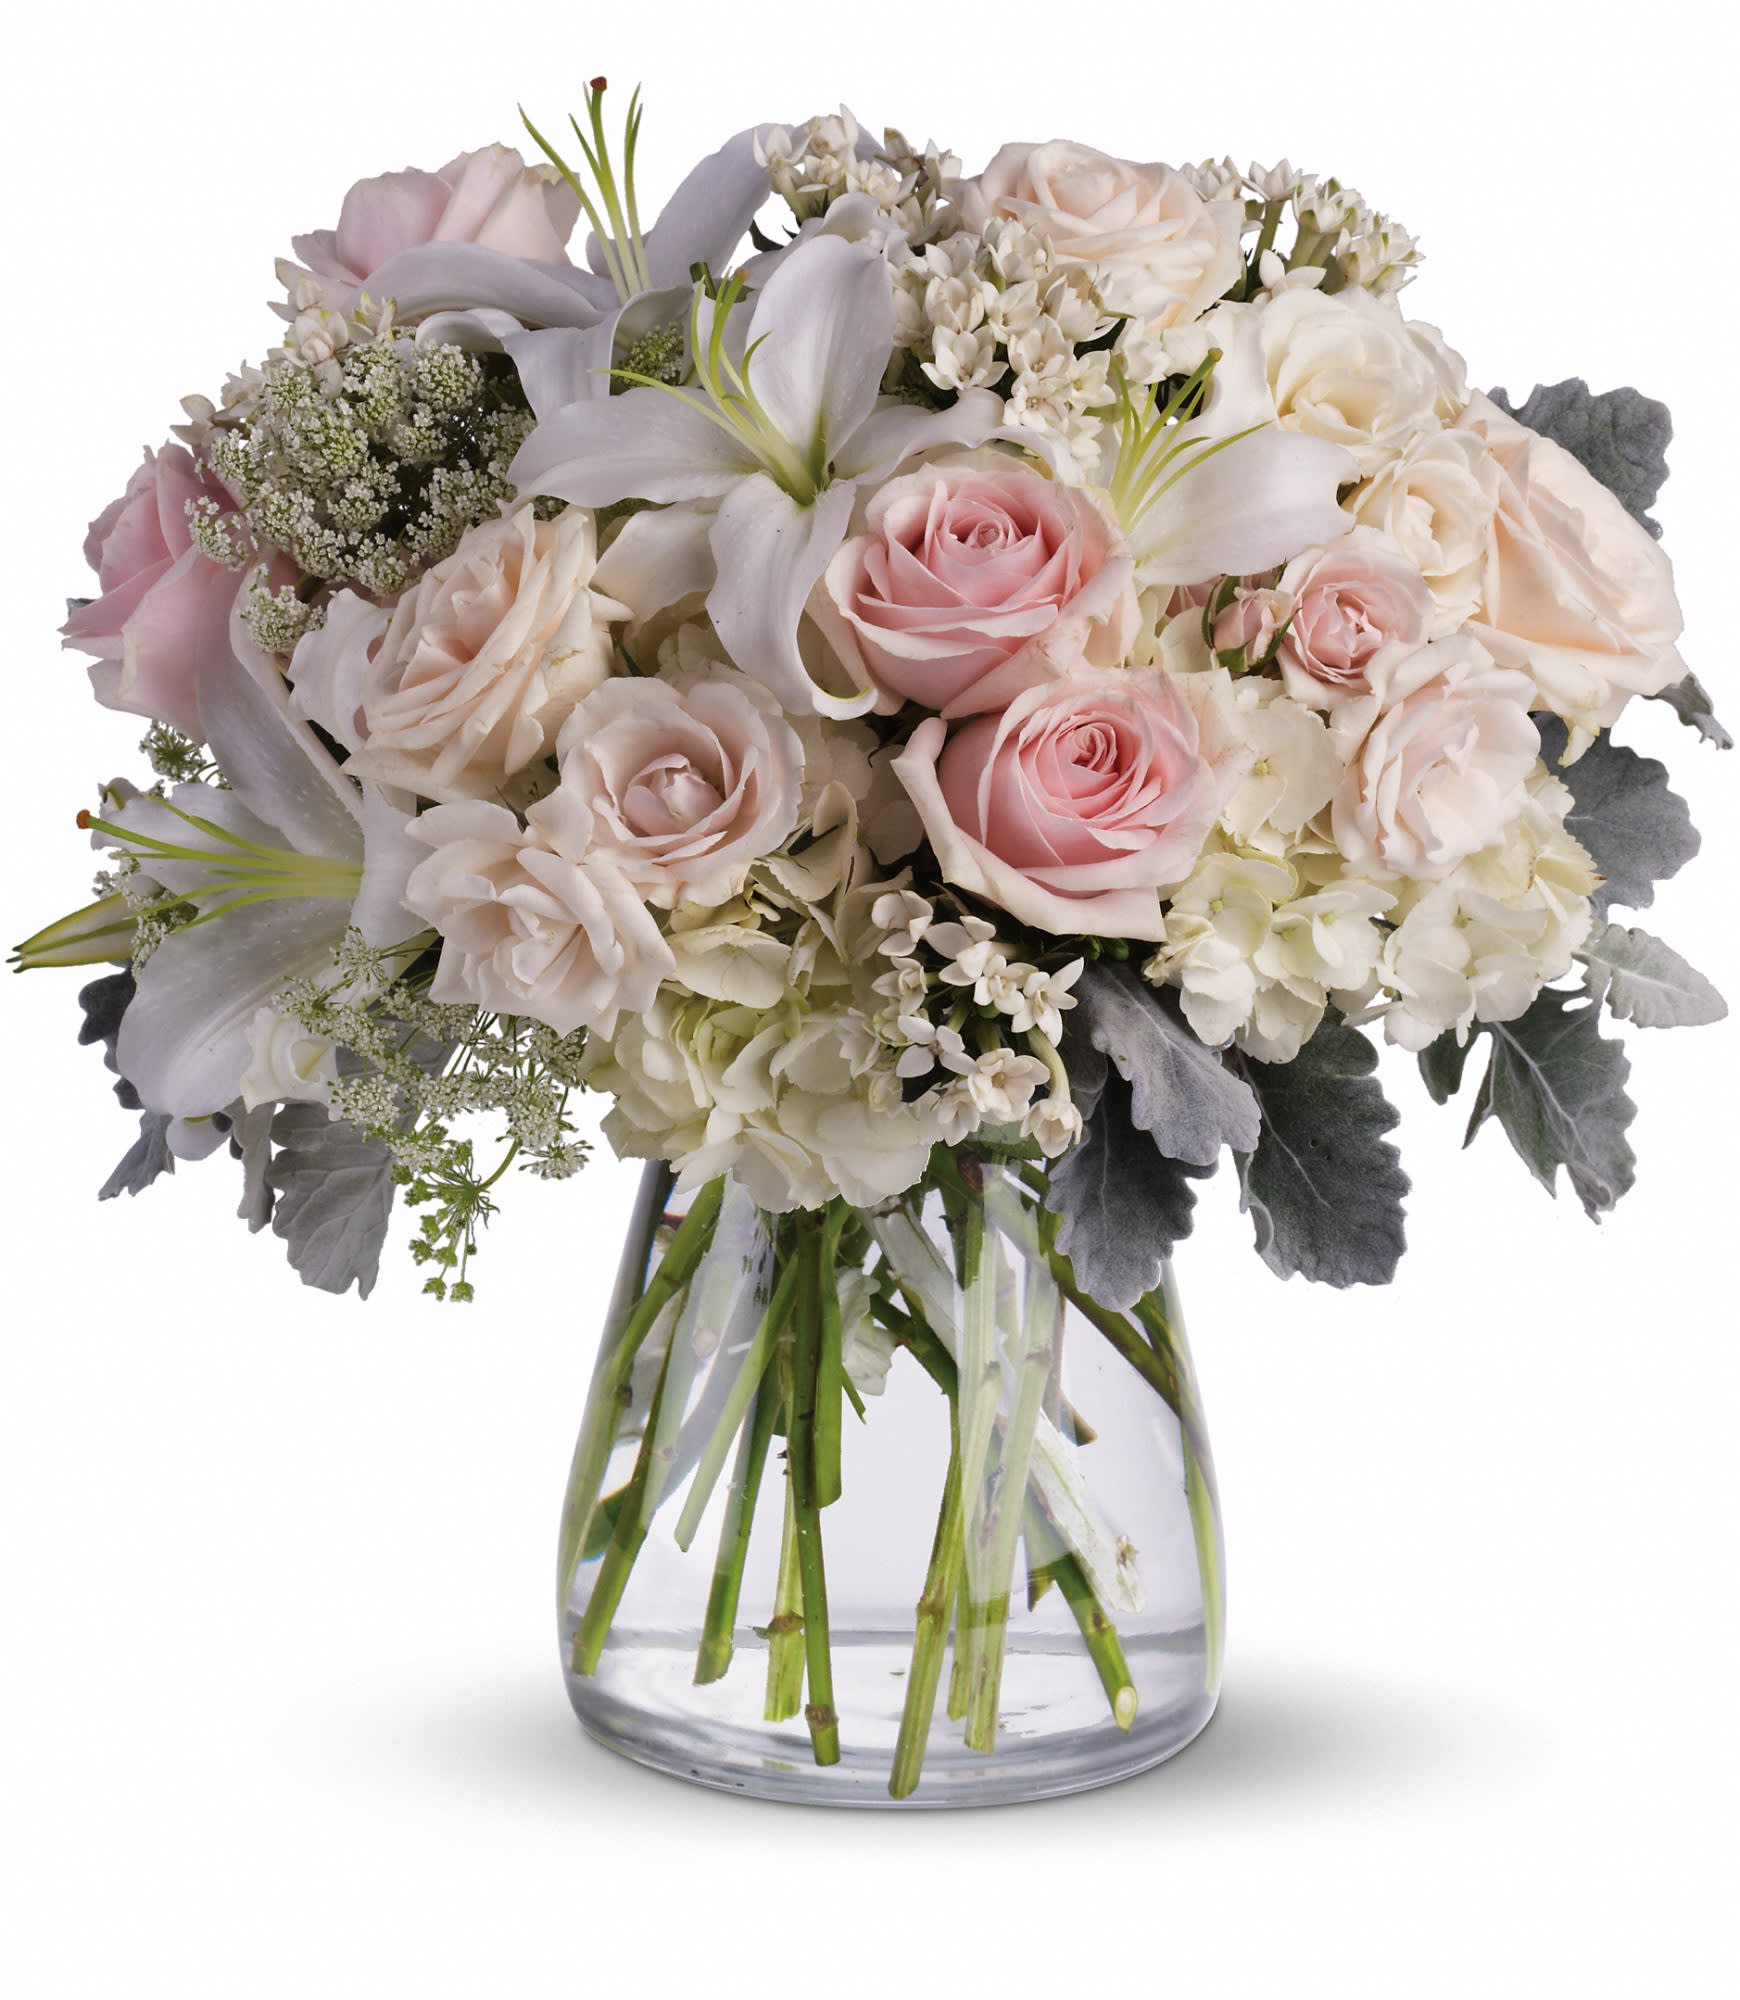 Beautiful Whisper by Teleflora - A whisper-quiet affirmation of love. Subtle shadings of pink and white roses, lilies and delicate Queen Anne's lace in a simple, elegant vase. 